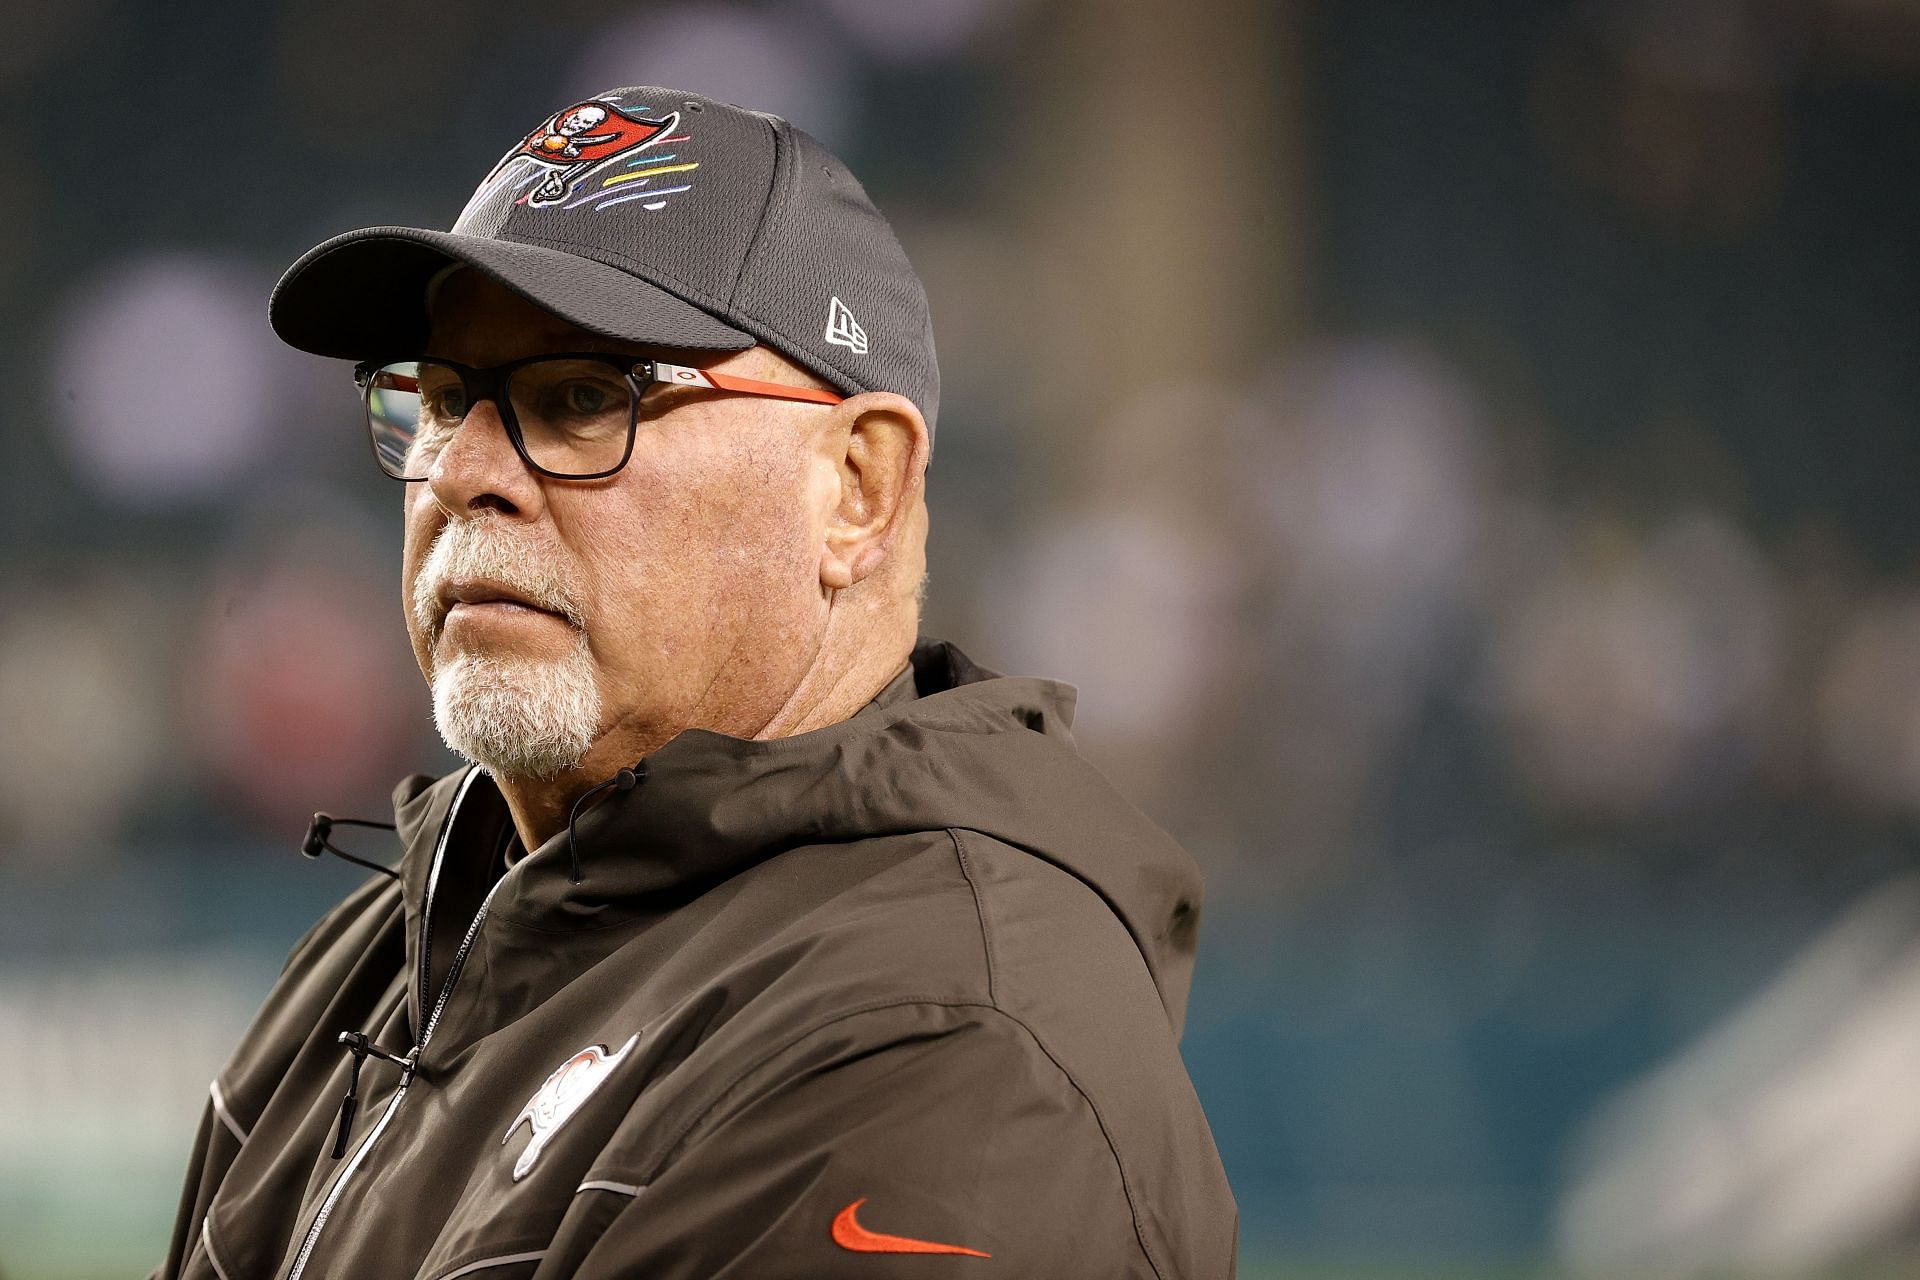 Bruce Arians, the man that signed Tom Brady